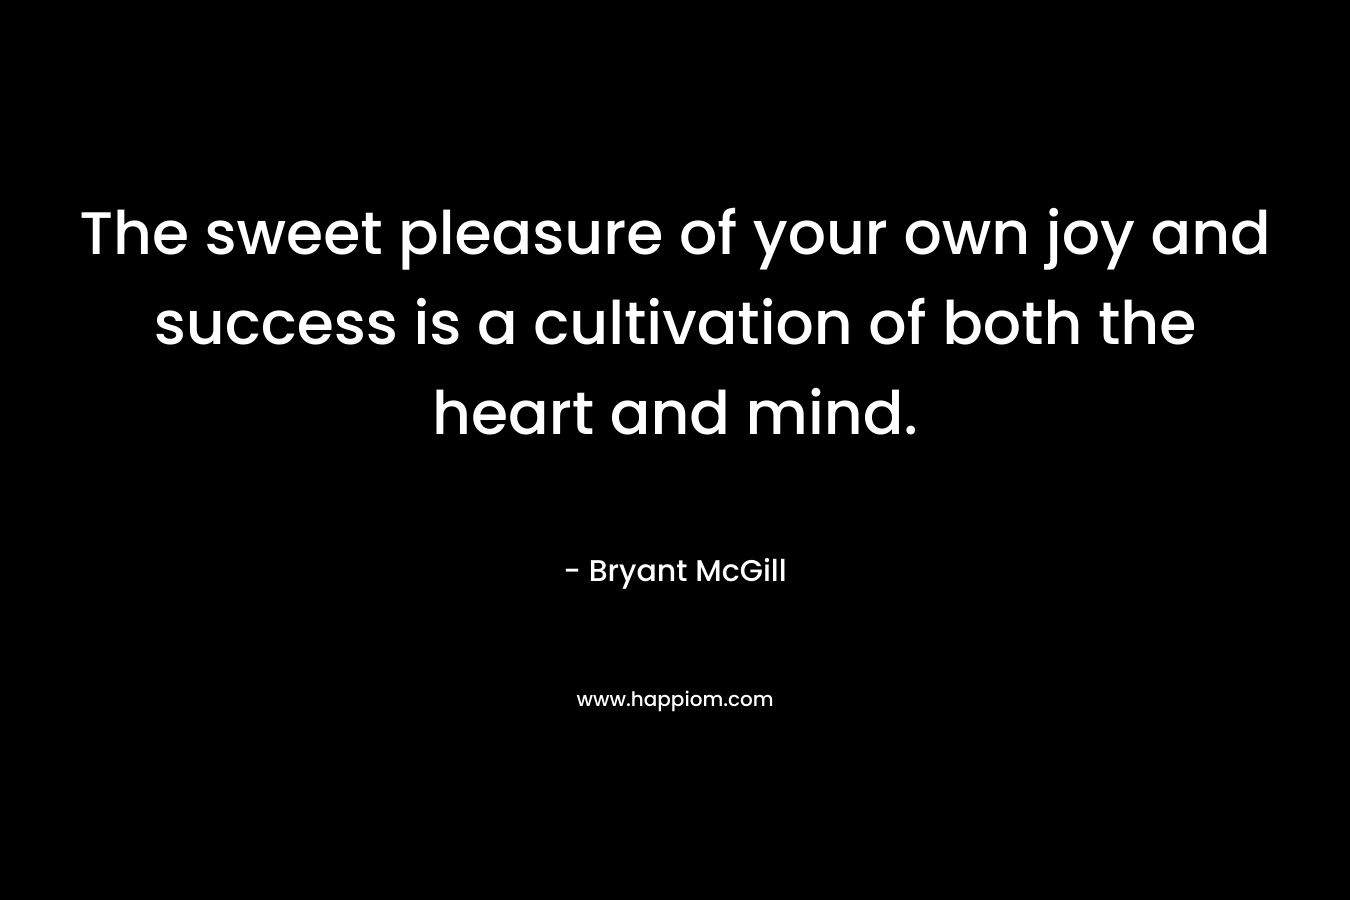 The sweet pleasure of your own joy and success is a cultivation of both the heart and mind.